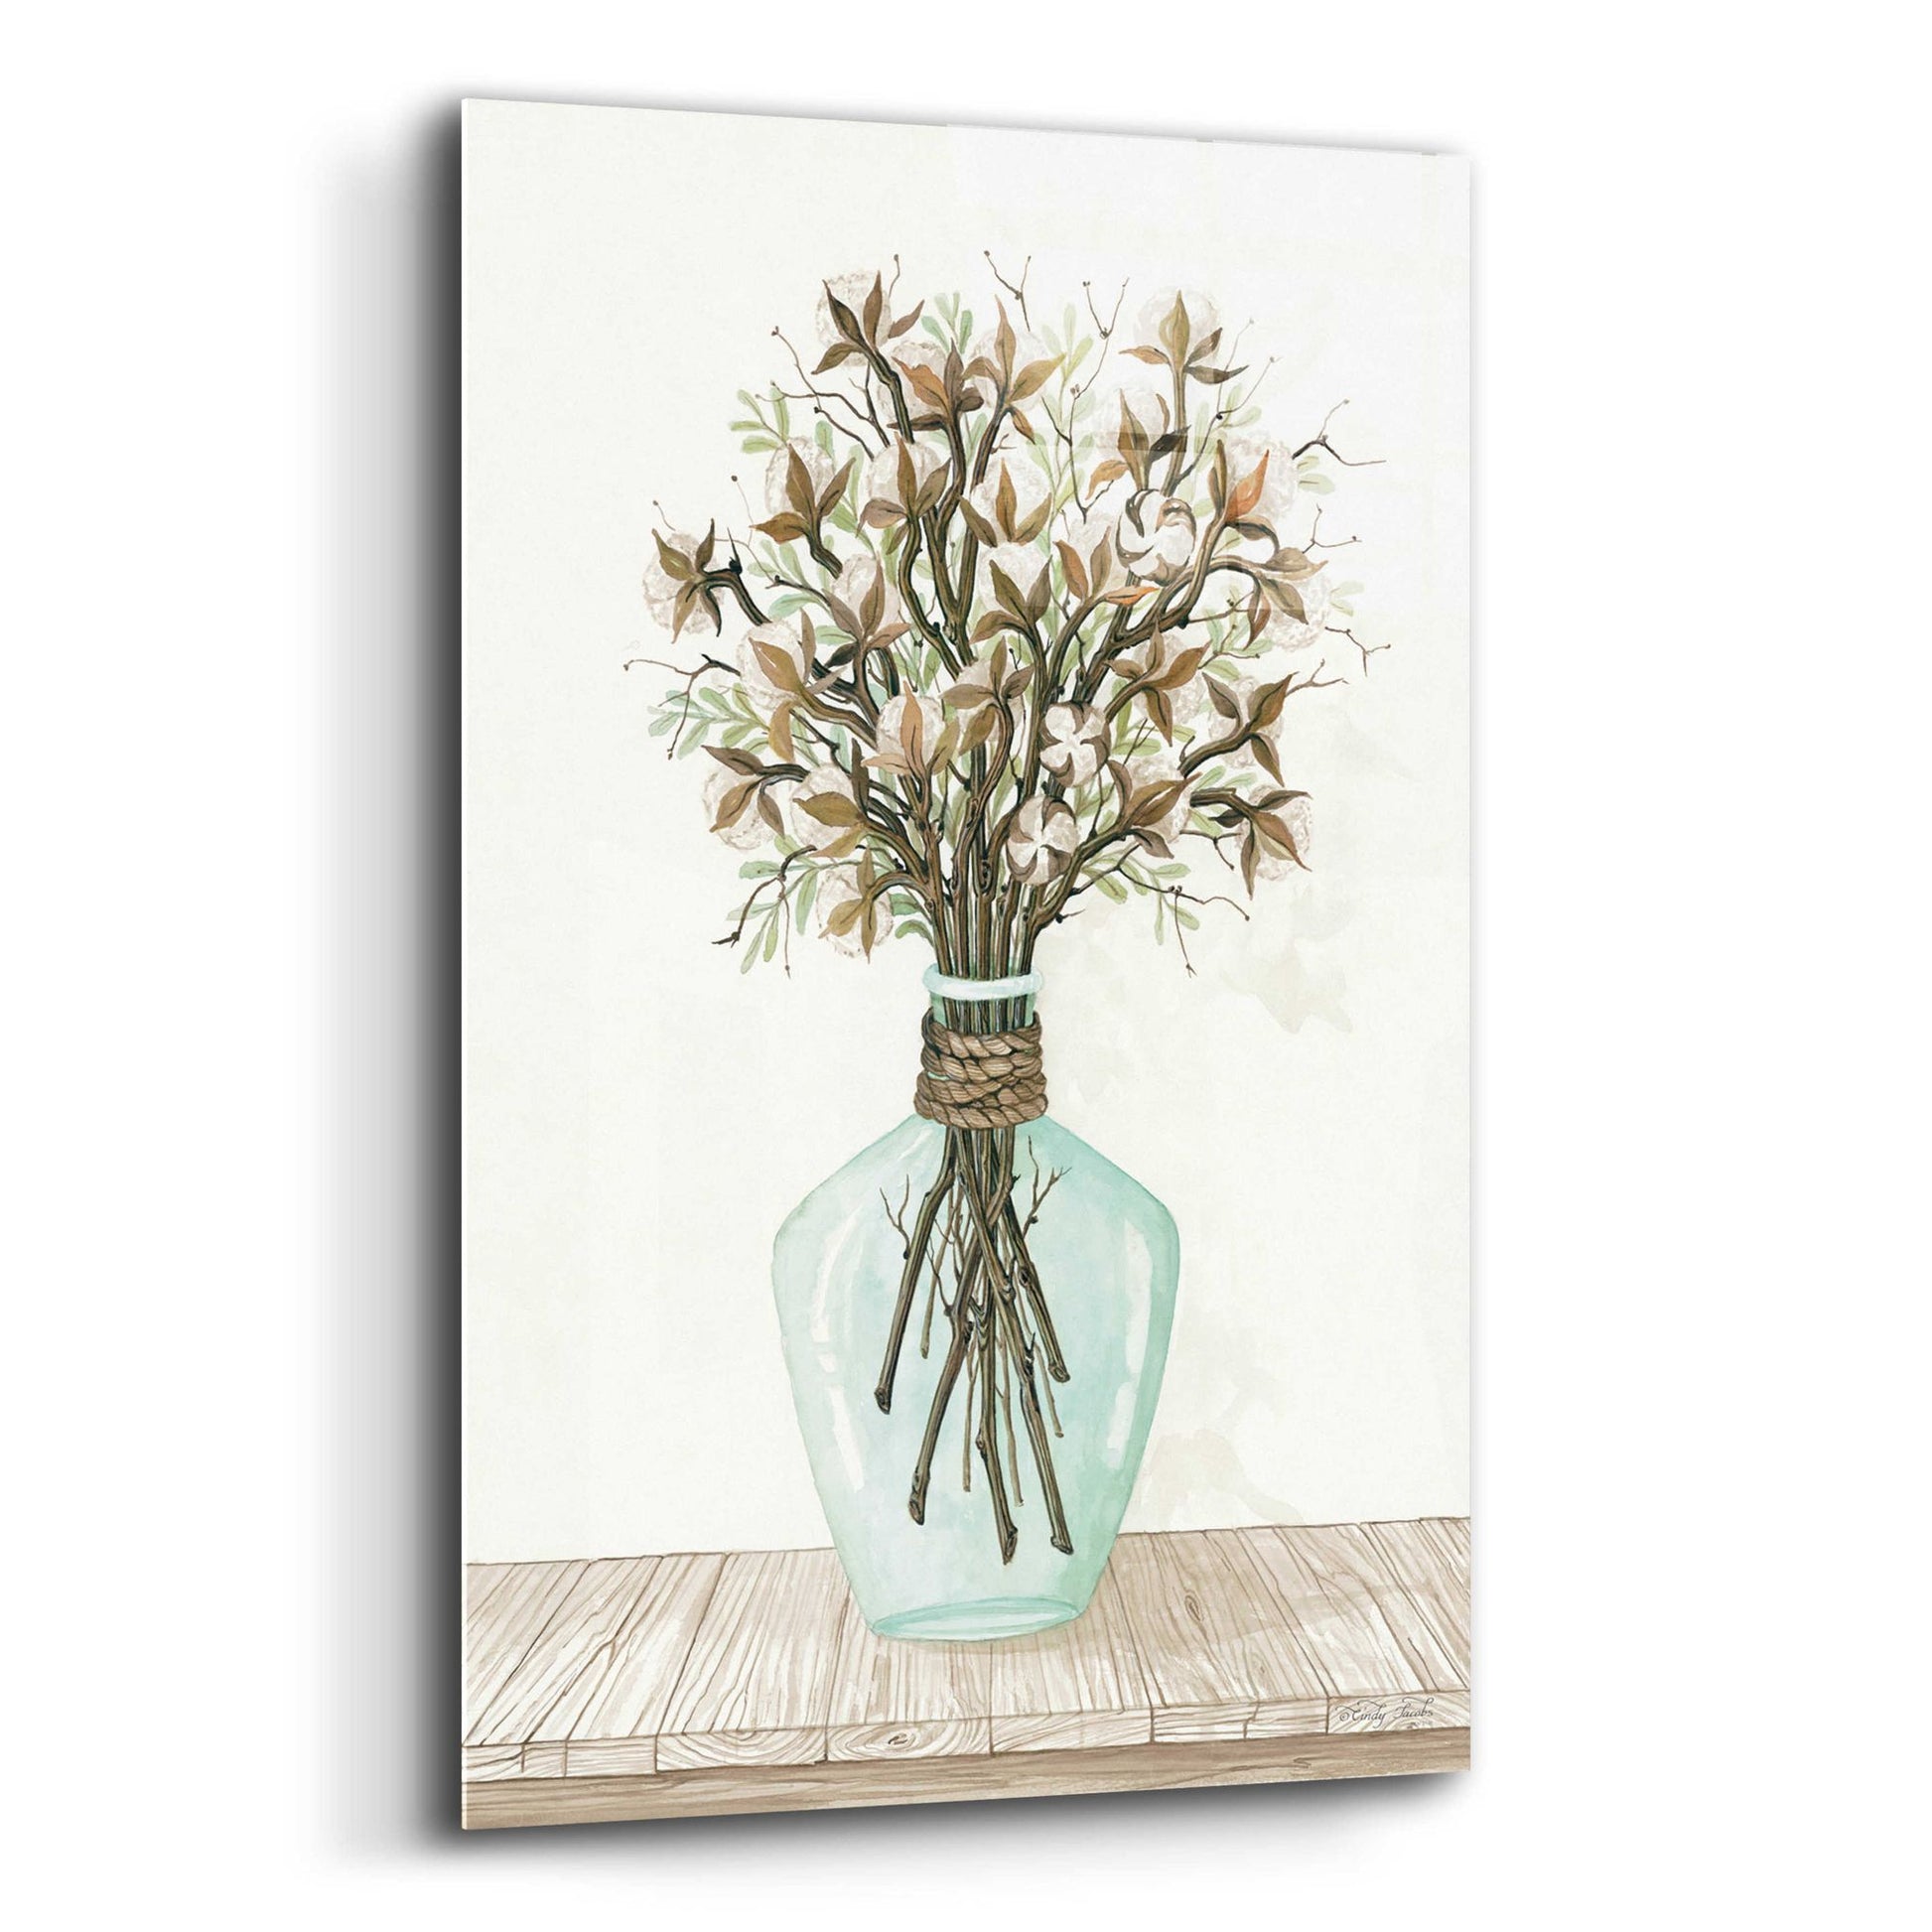 Epic Art 'Cotton Bouquet' by Cindy Jacobs, Acrylic Glass Wall Art,12x16